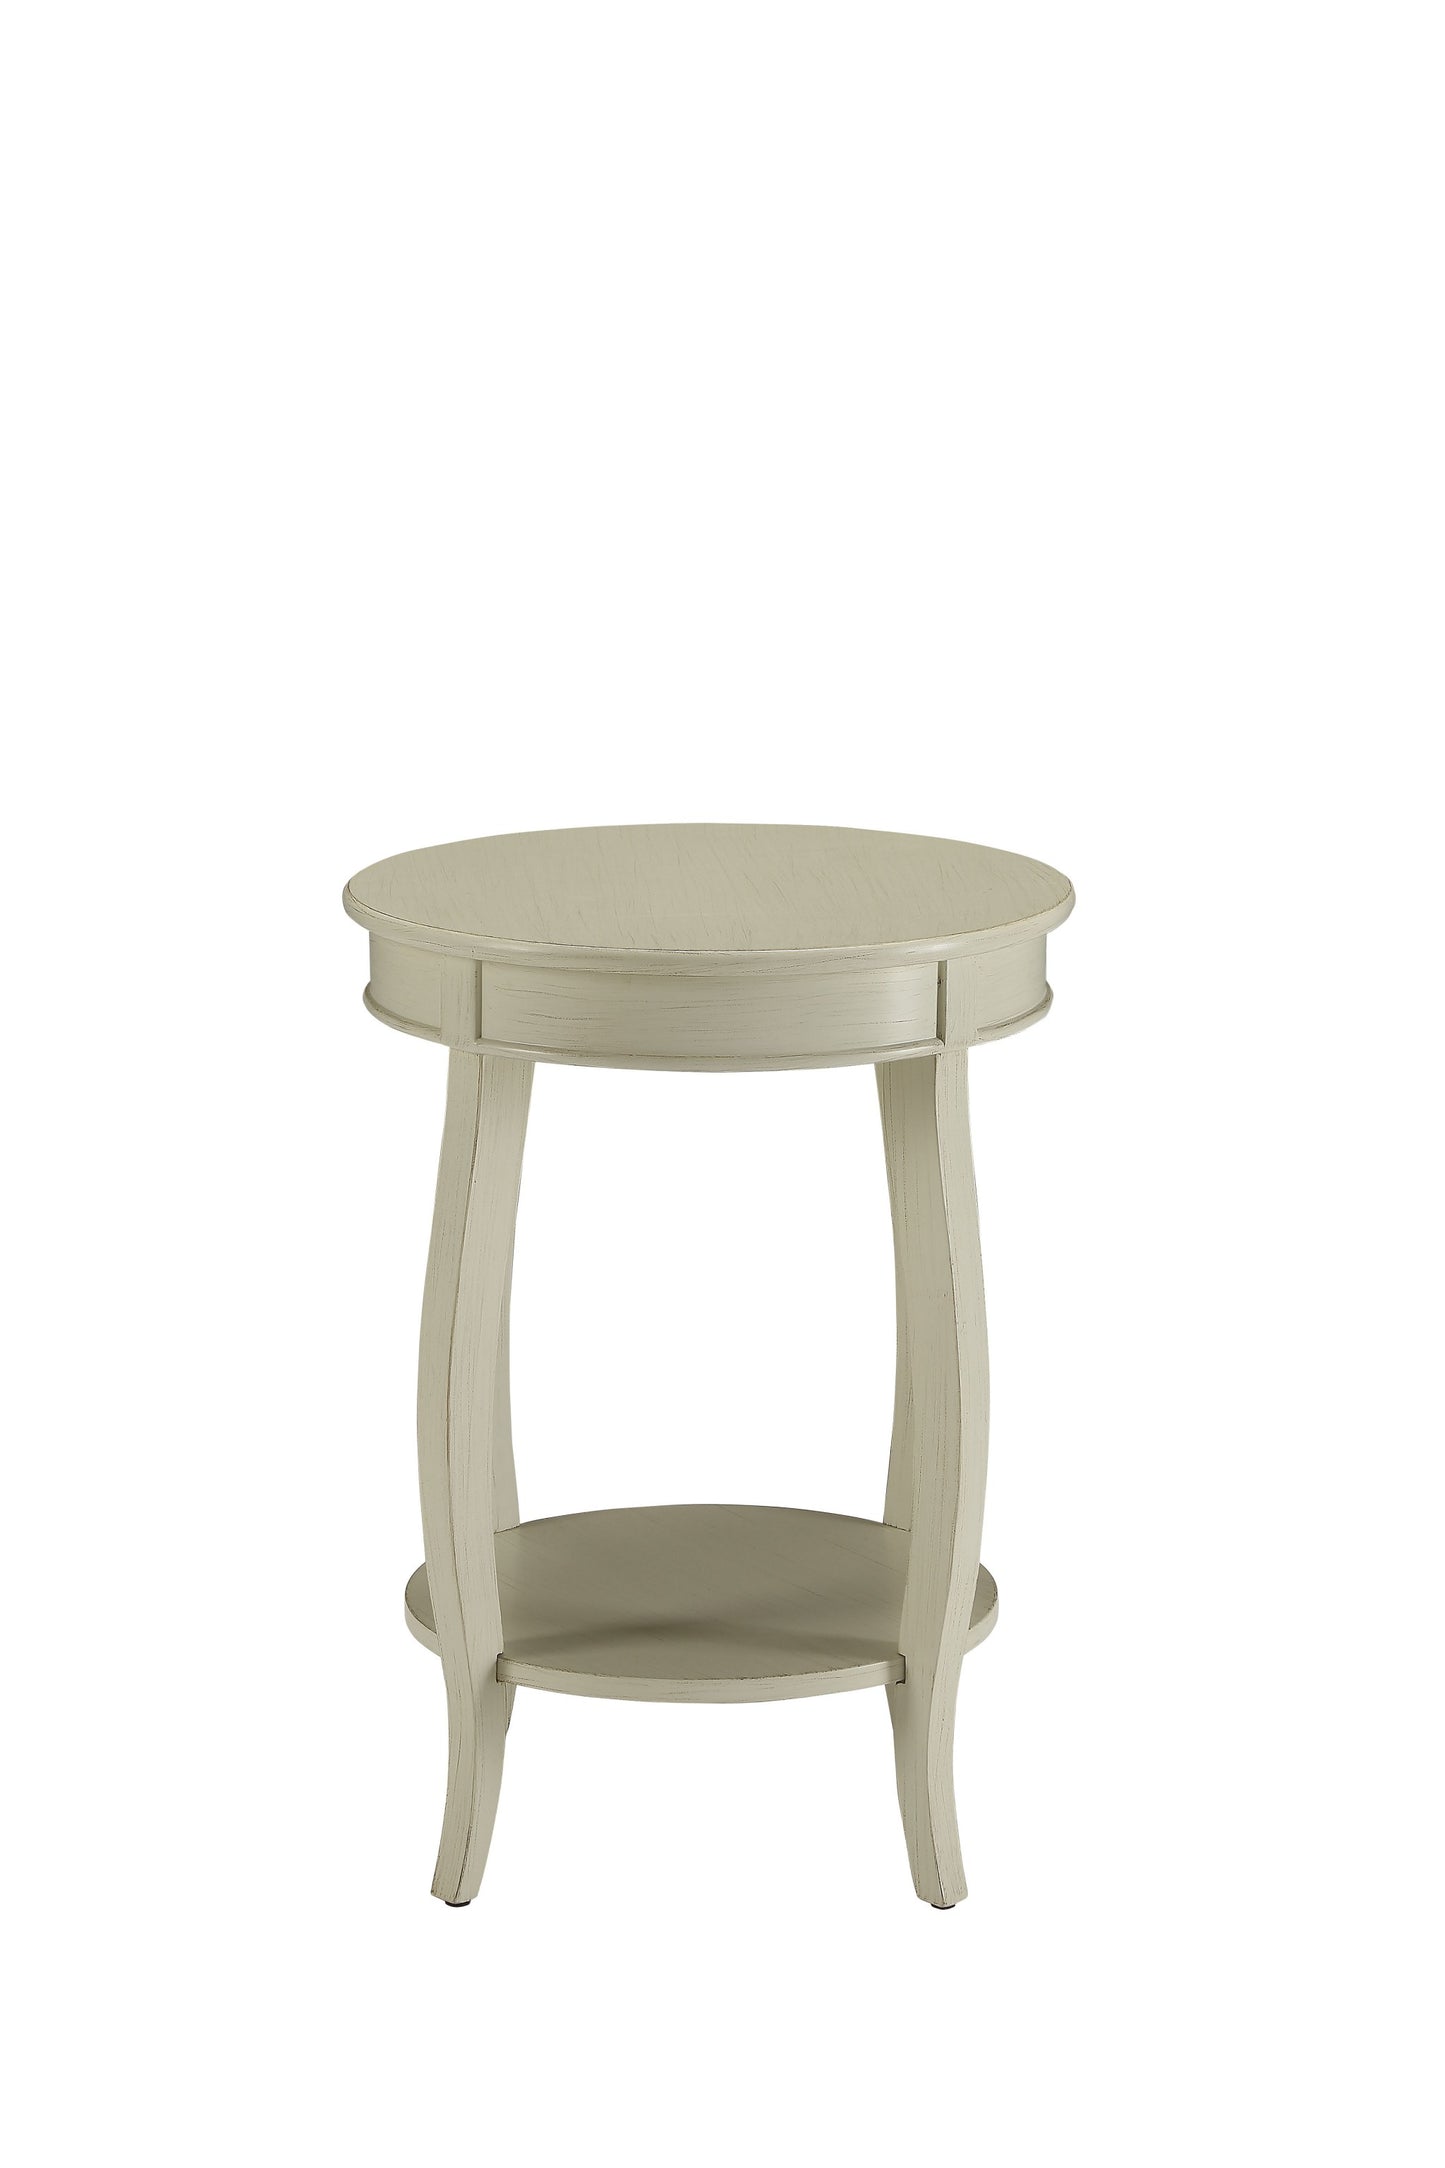 24" White Solid Wood Round End Table With Shelf